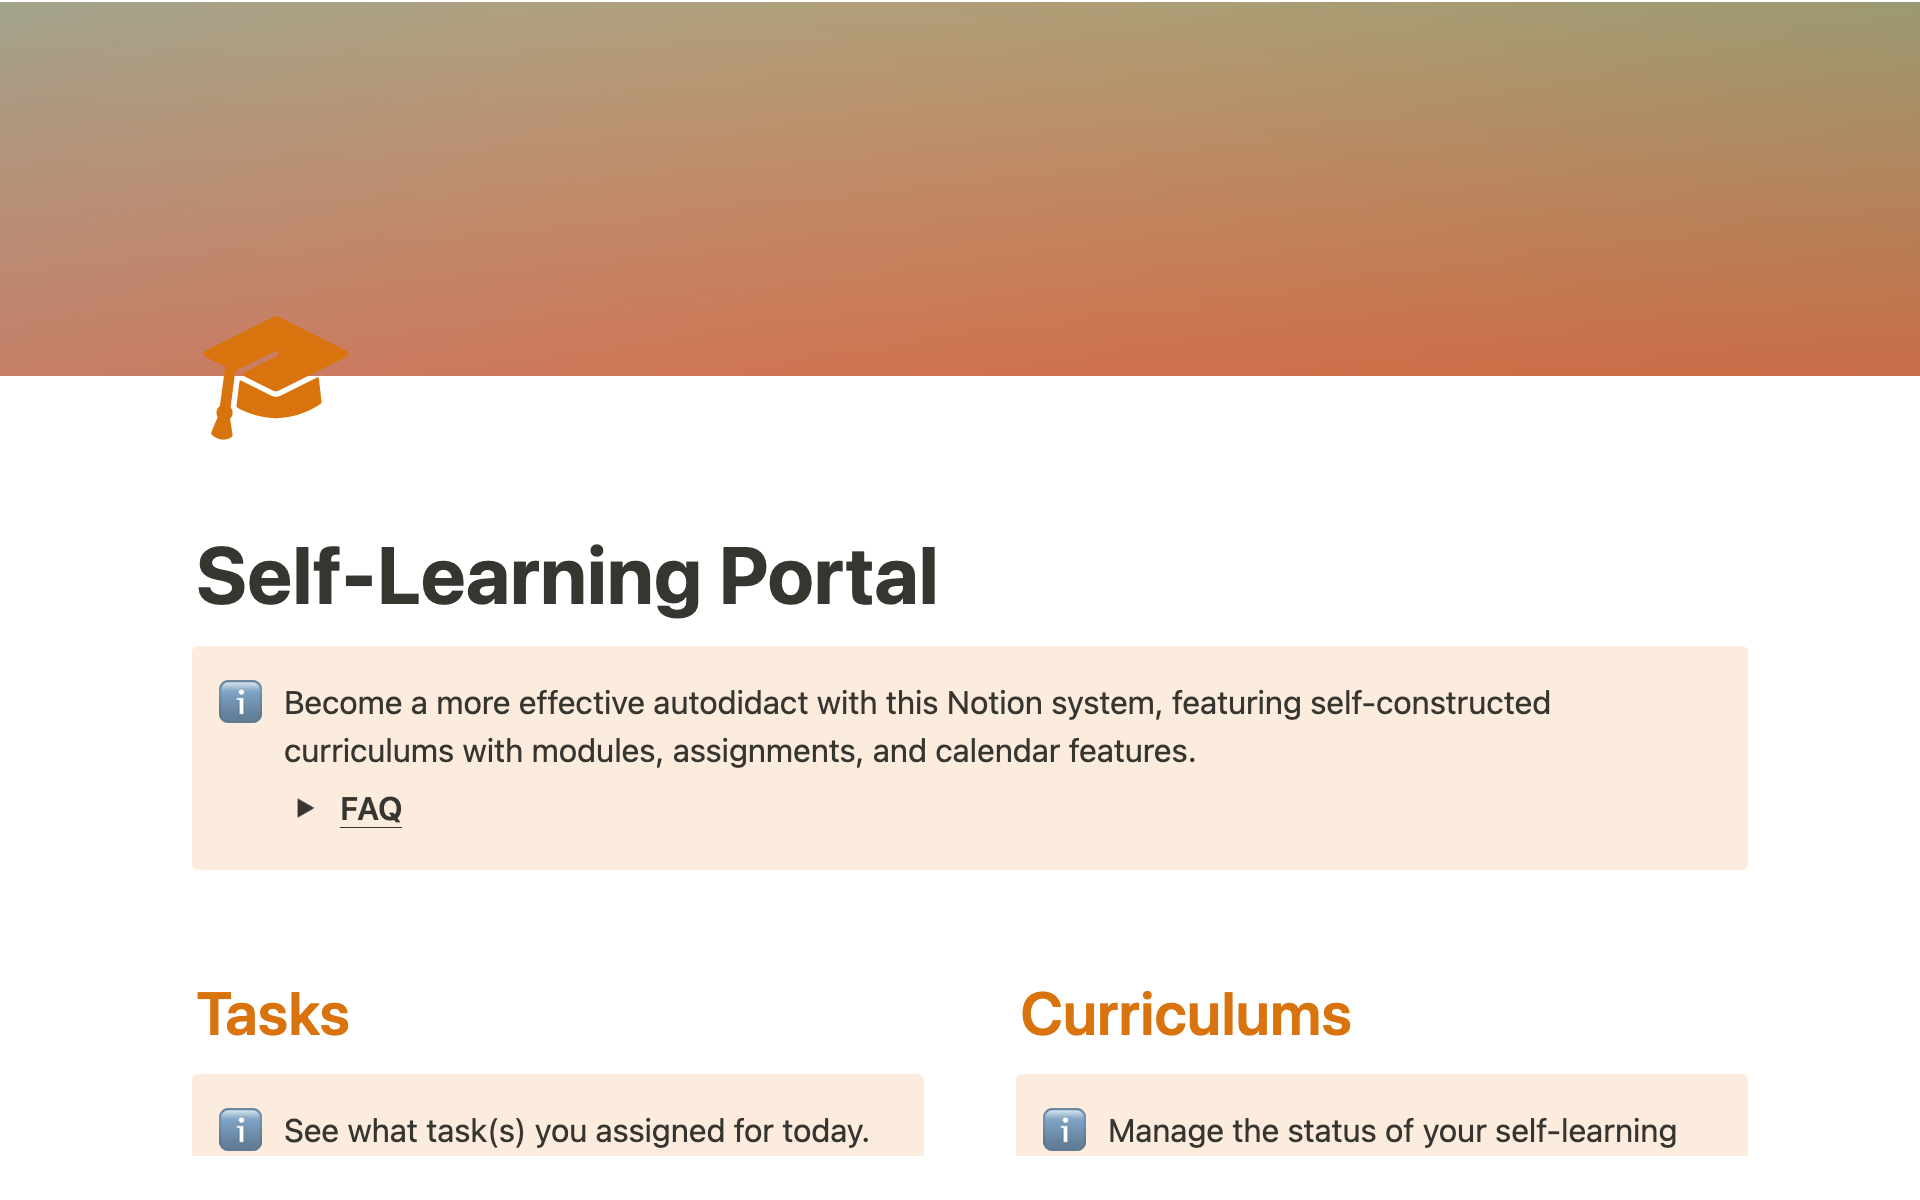 Discover the Self-Learning Portal, the perfect tool to help you create and manage personalized educational curriculums and learning tasks to embark on the journey of self-learning.